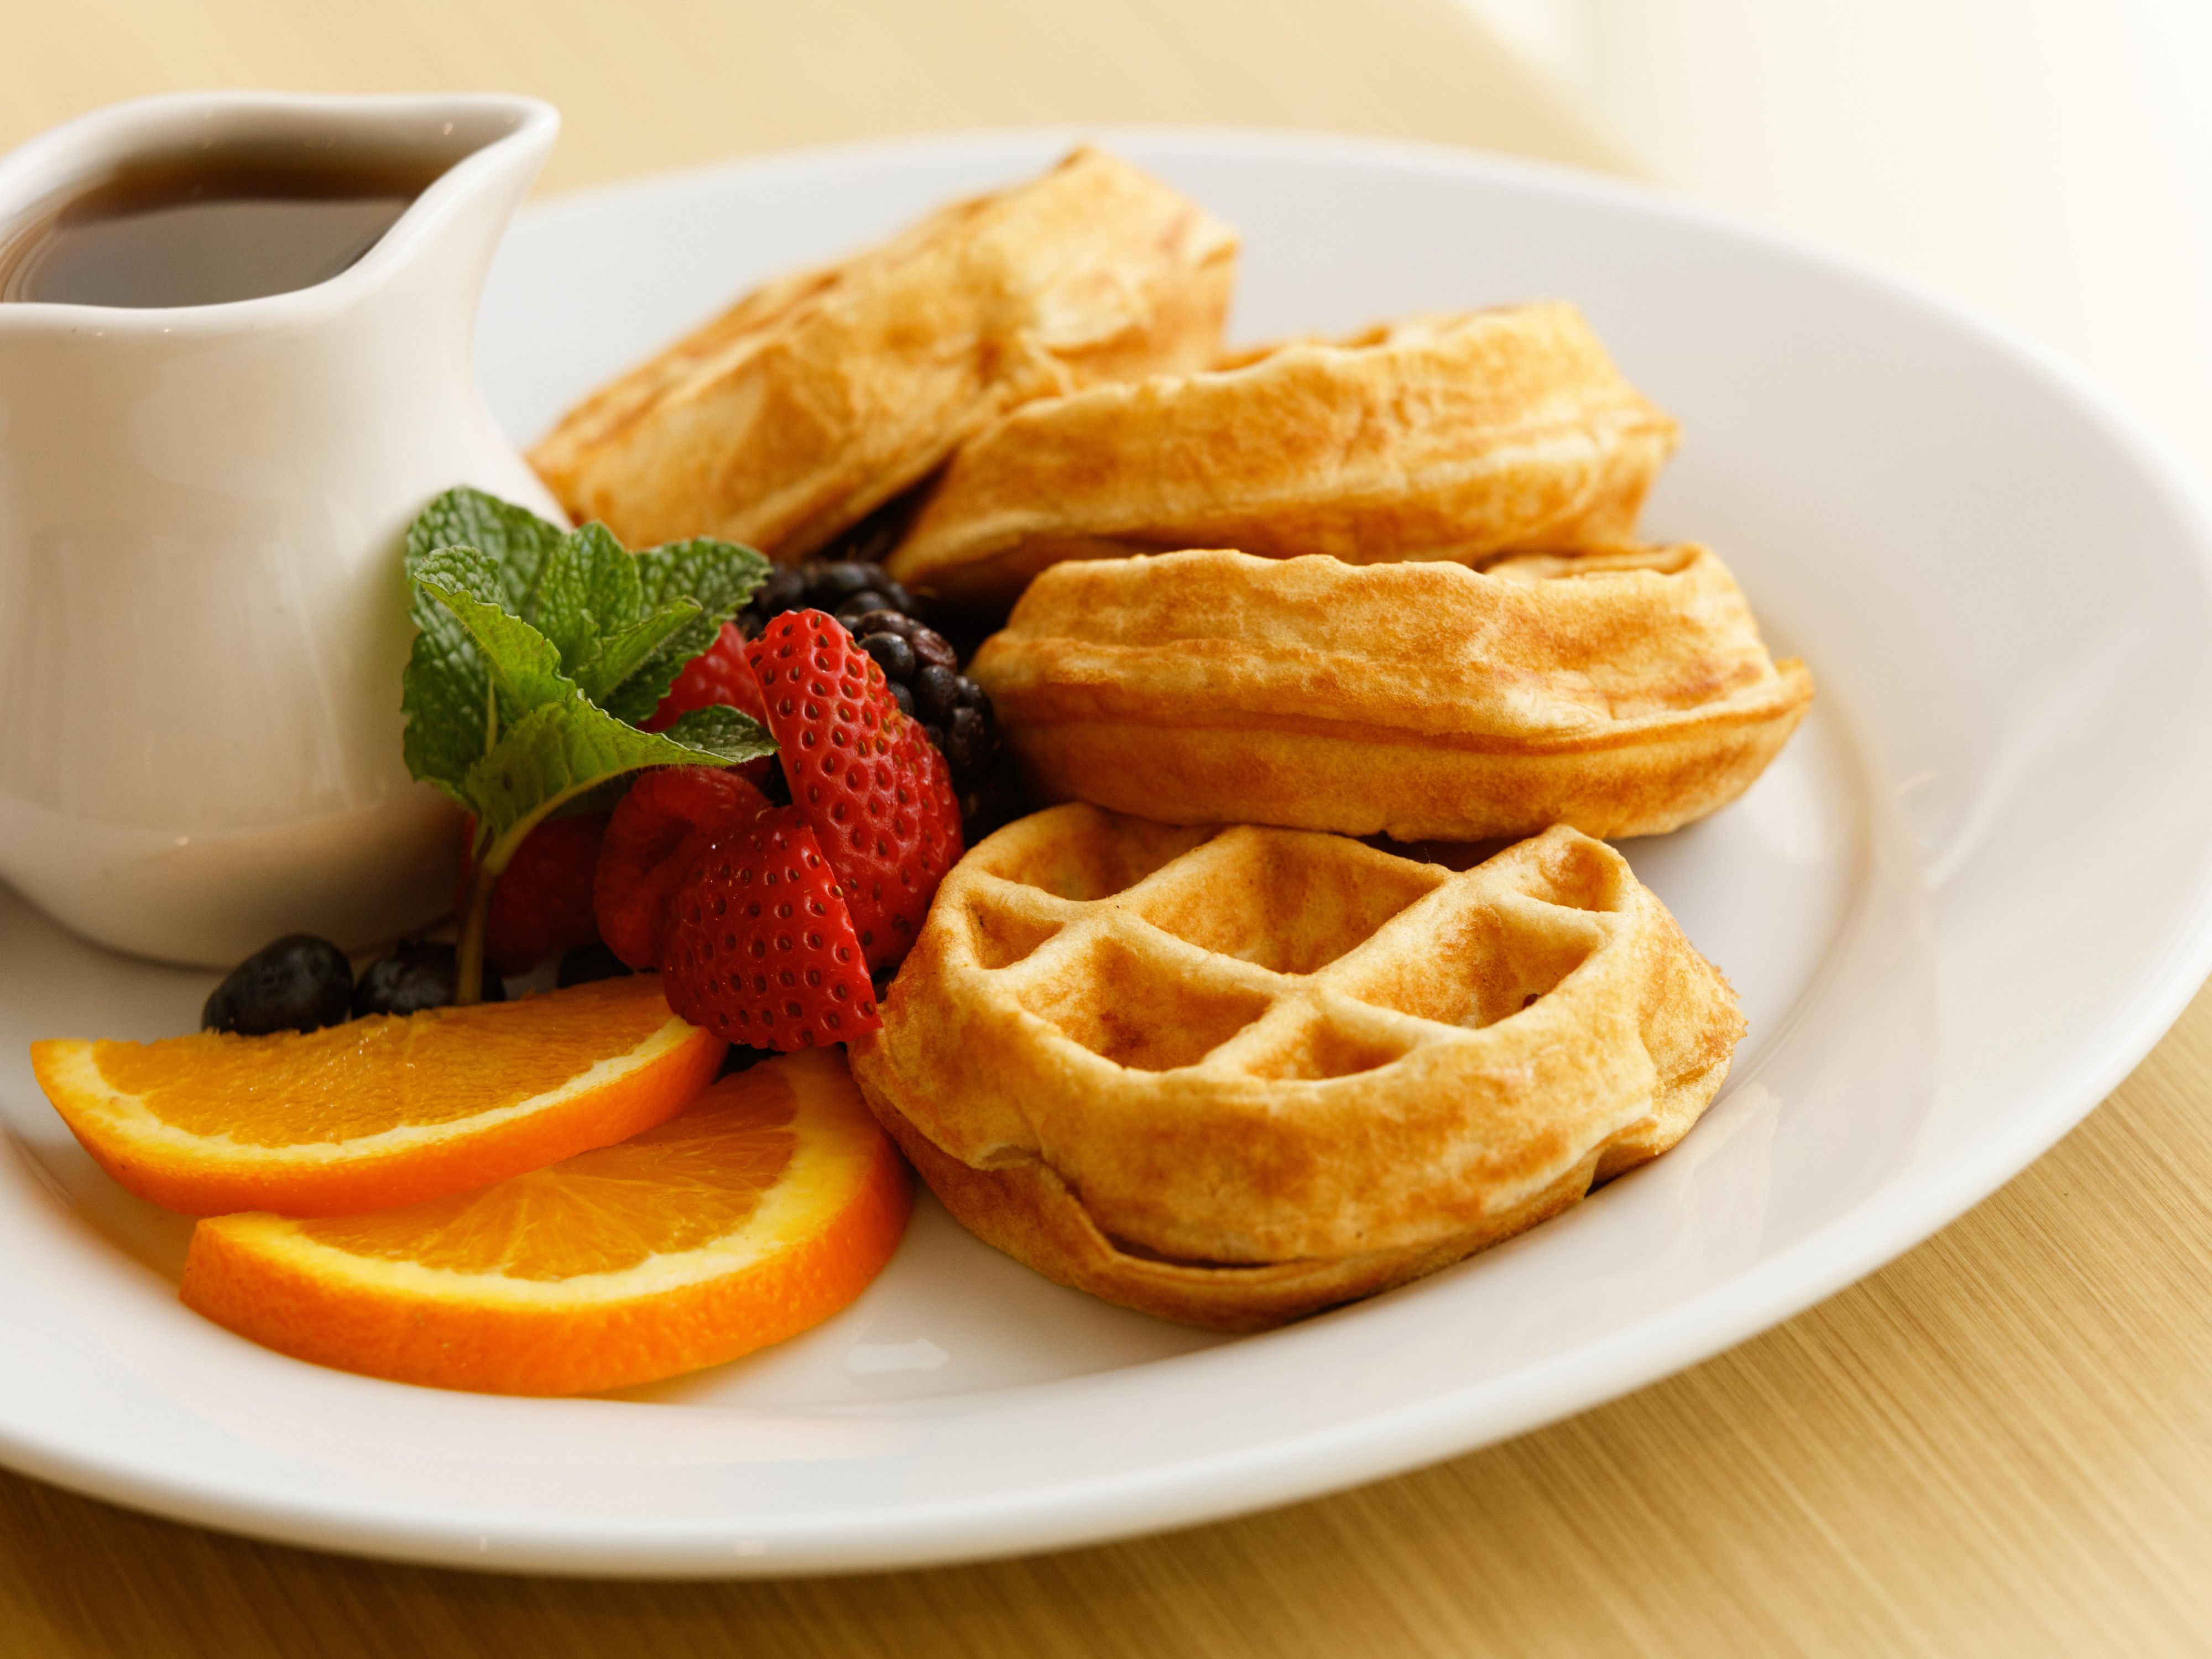 Enhance Your Stay With Breakfast!